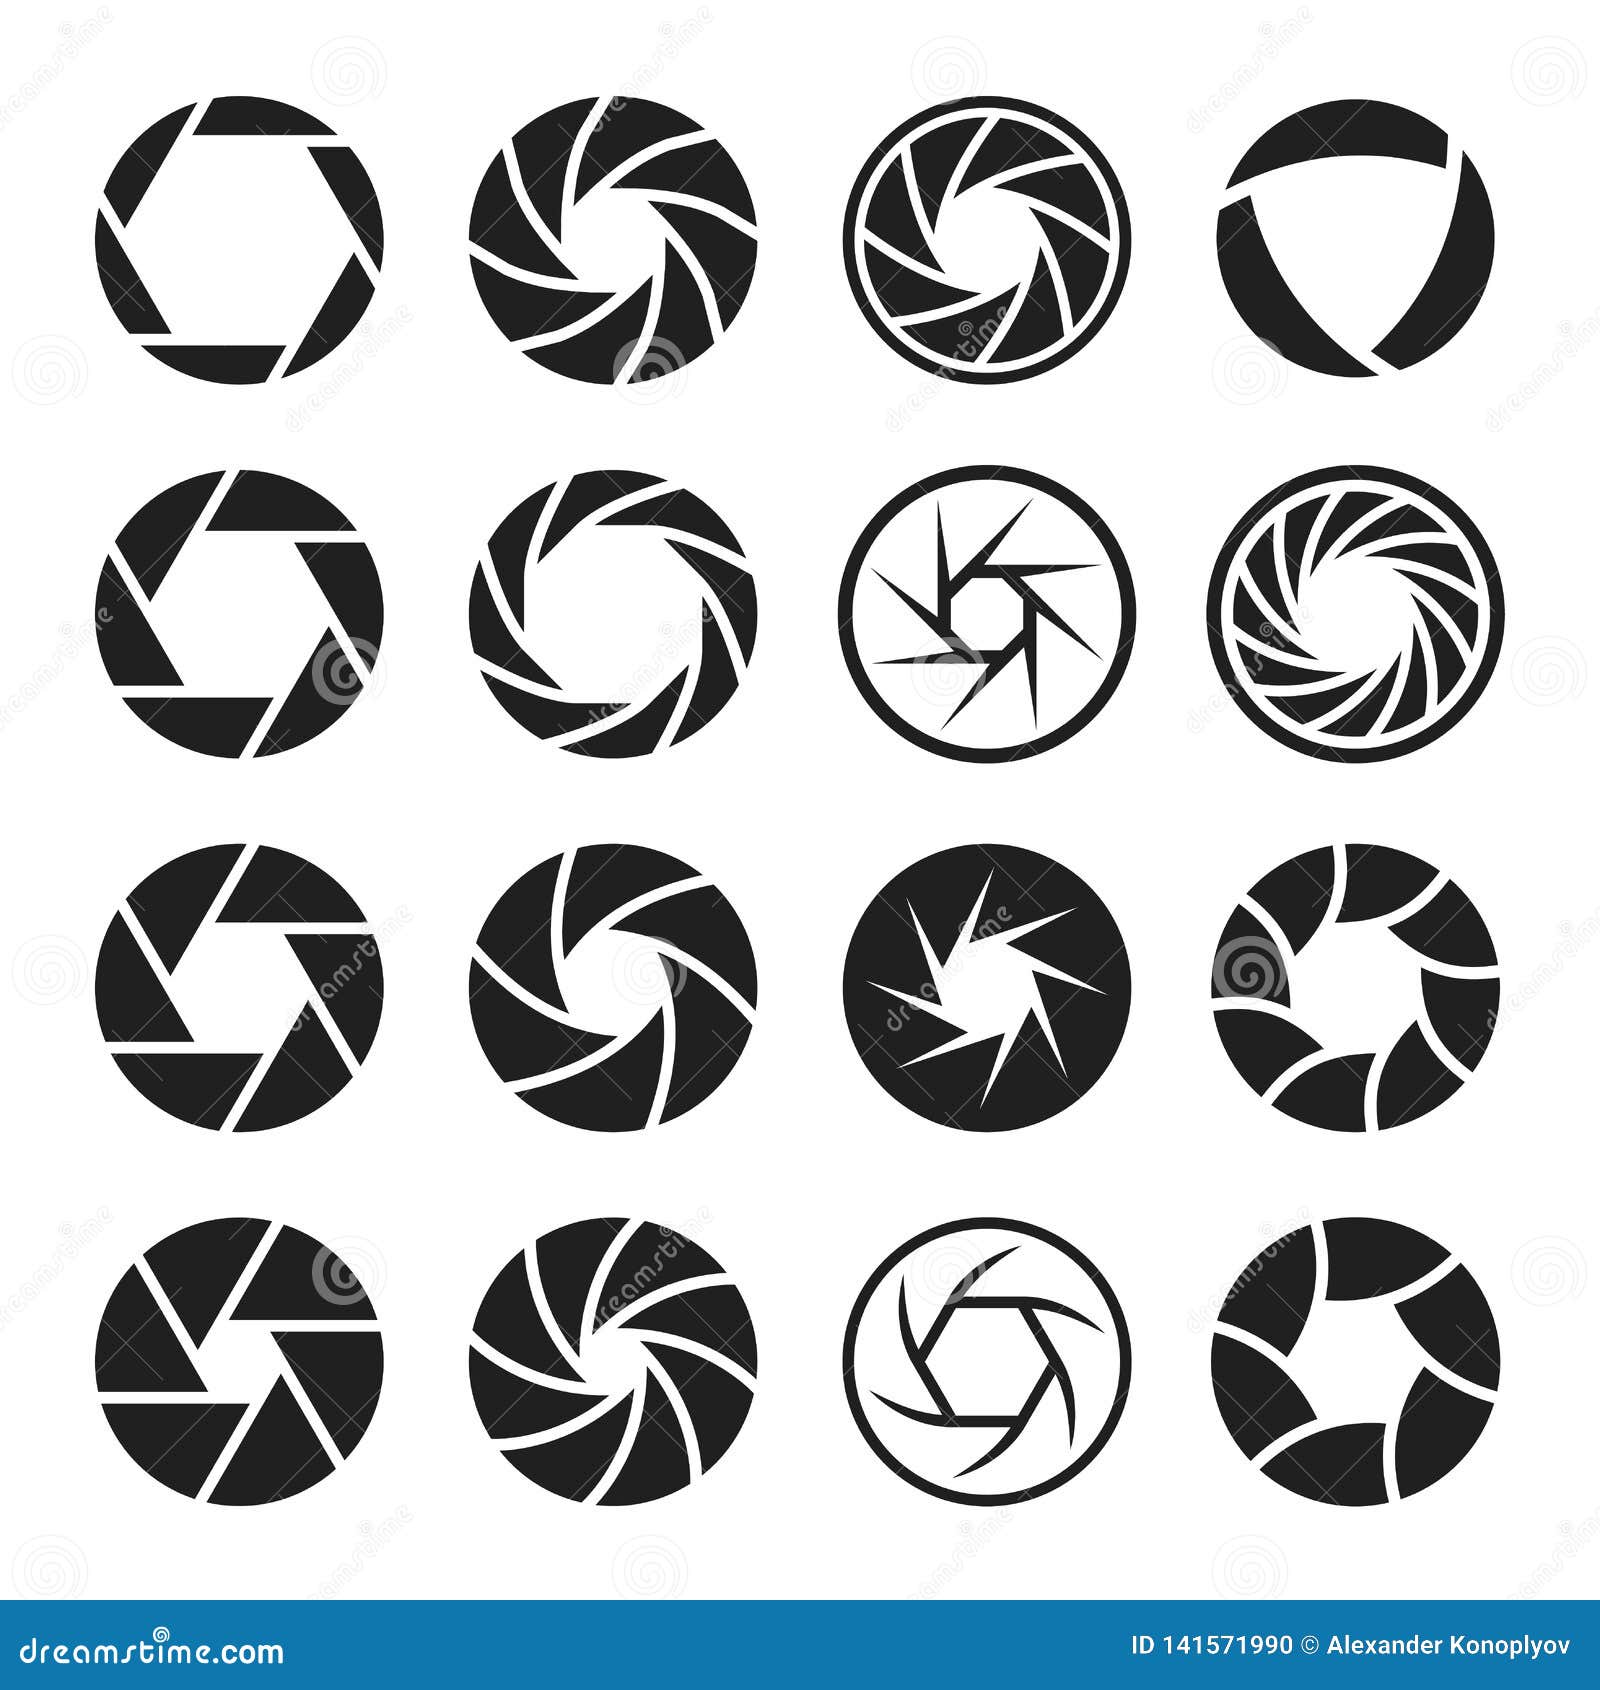 camera shutter icon set, photo and video equipment